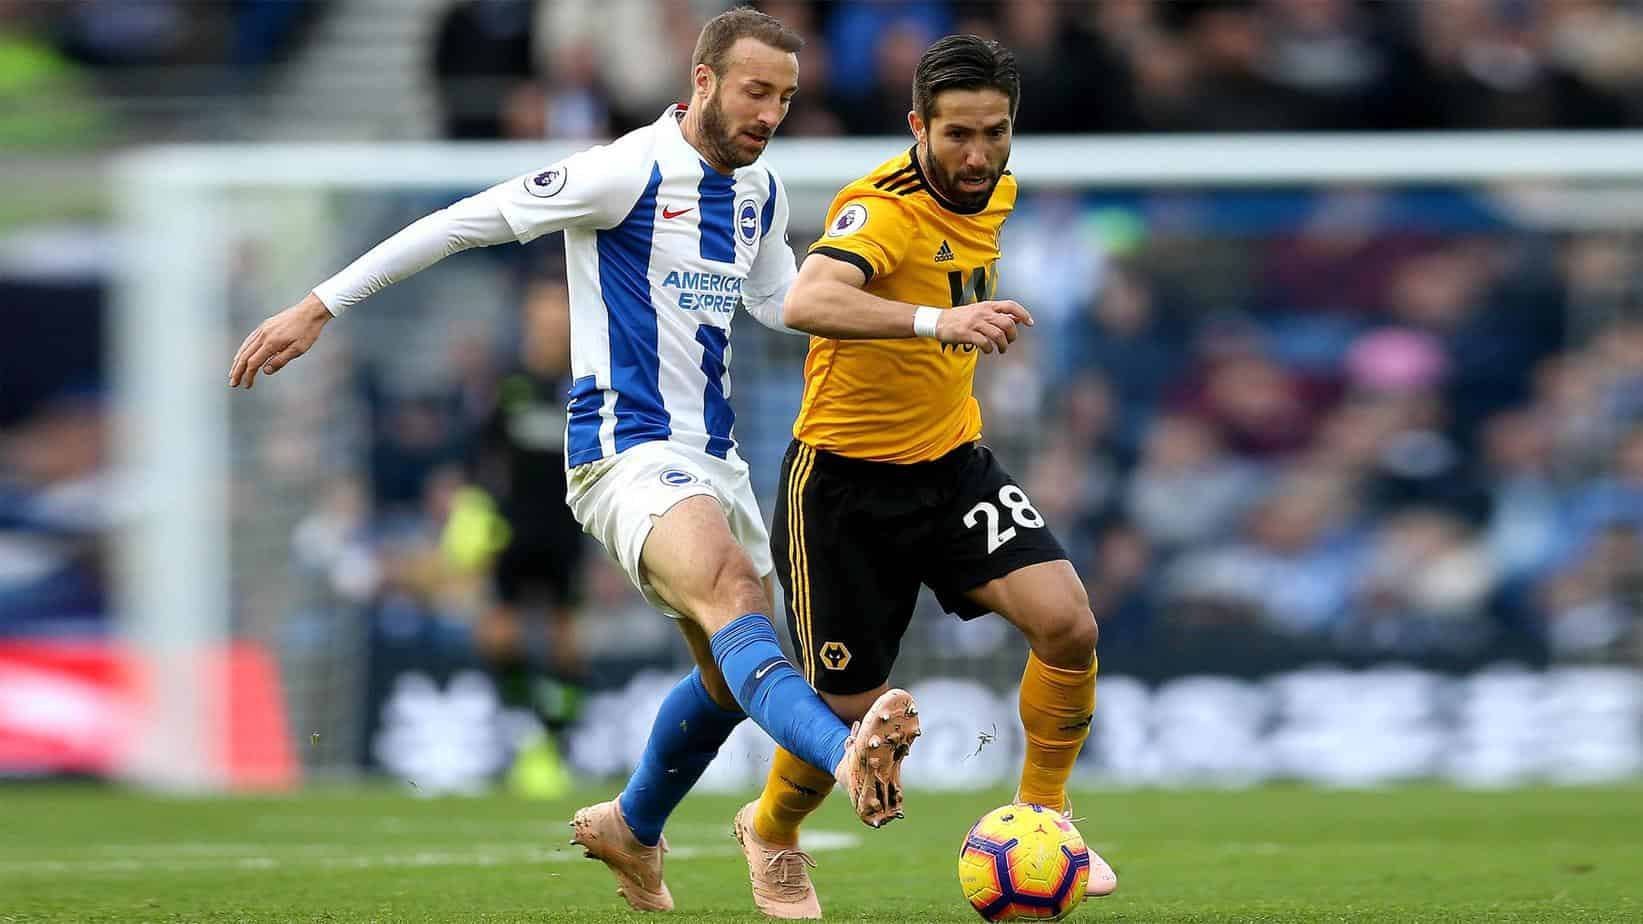 Brighton vs. Wolves – Betting Odds and Preview